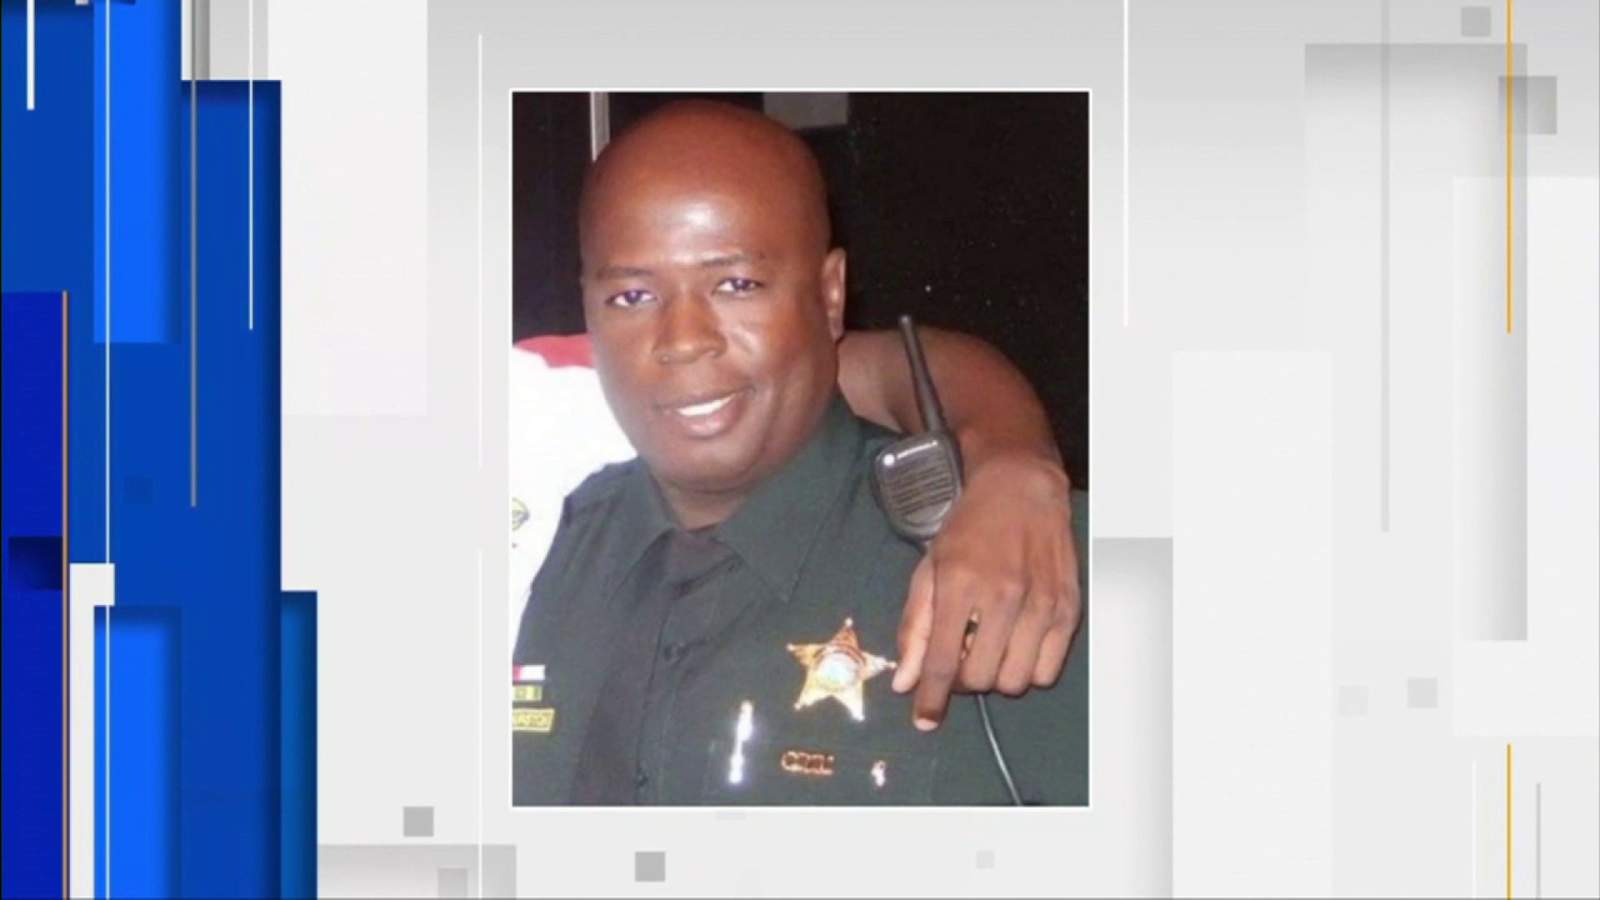 Broward deputy claims reassignment is politically motivated, attorney says